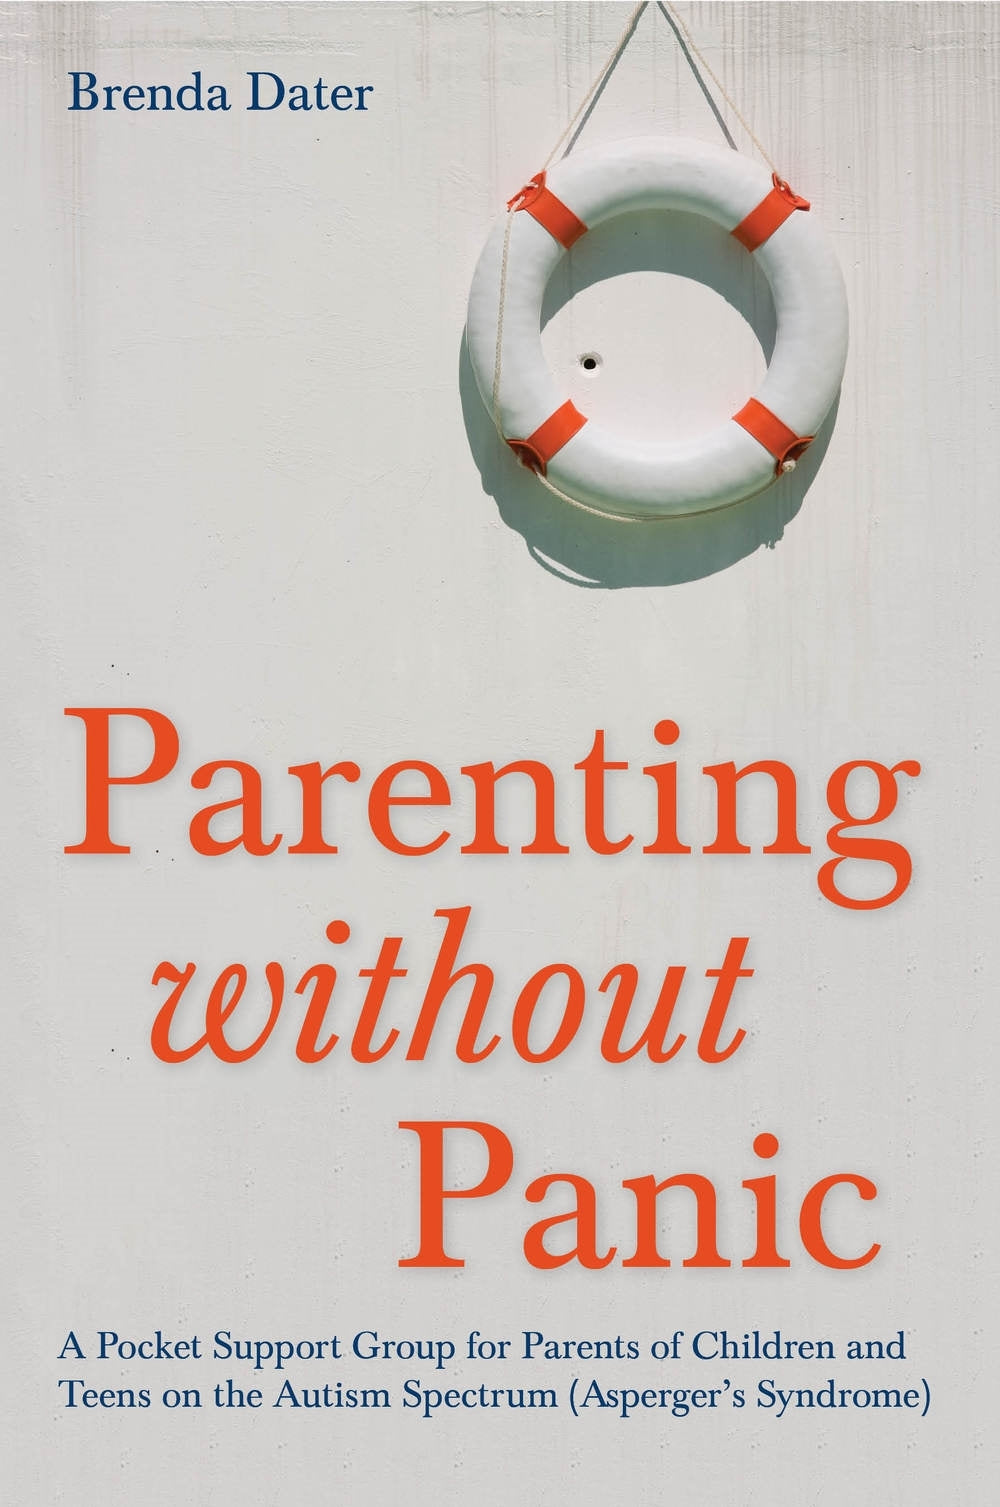 Parenting without Panic by Brenda Dater